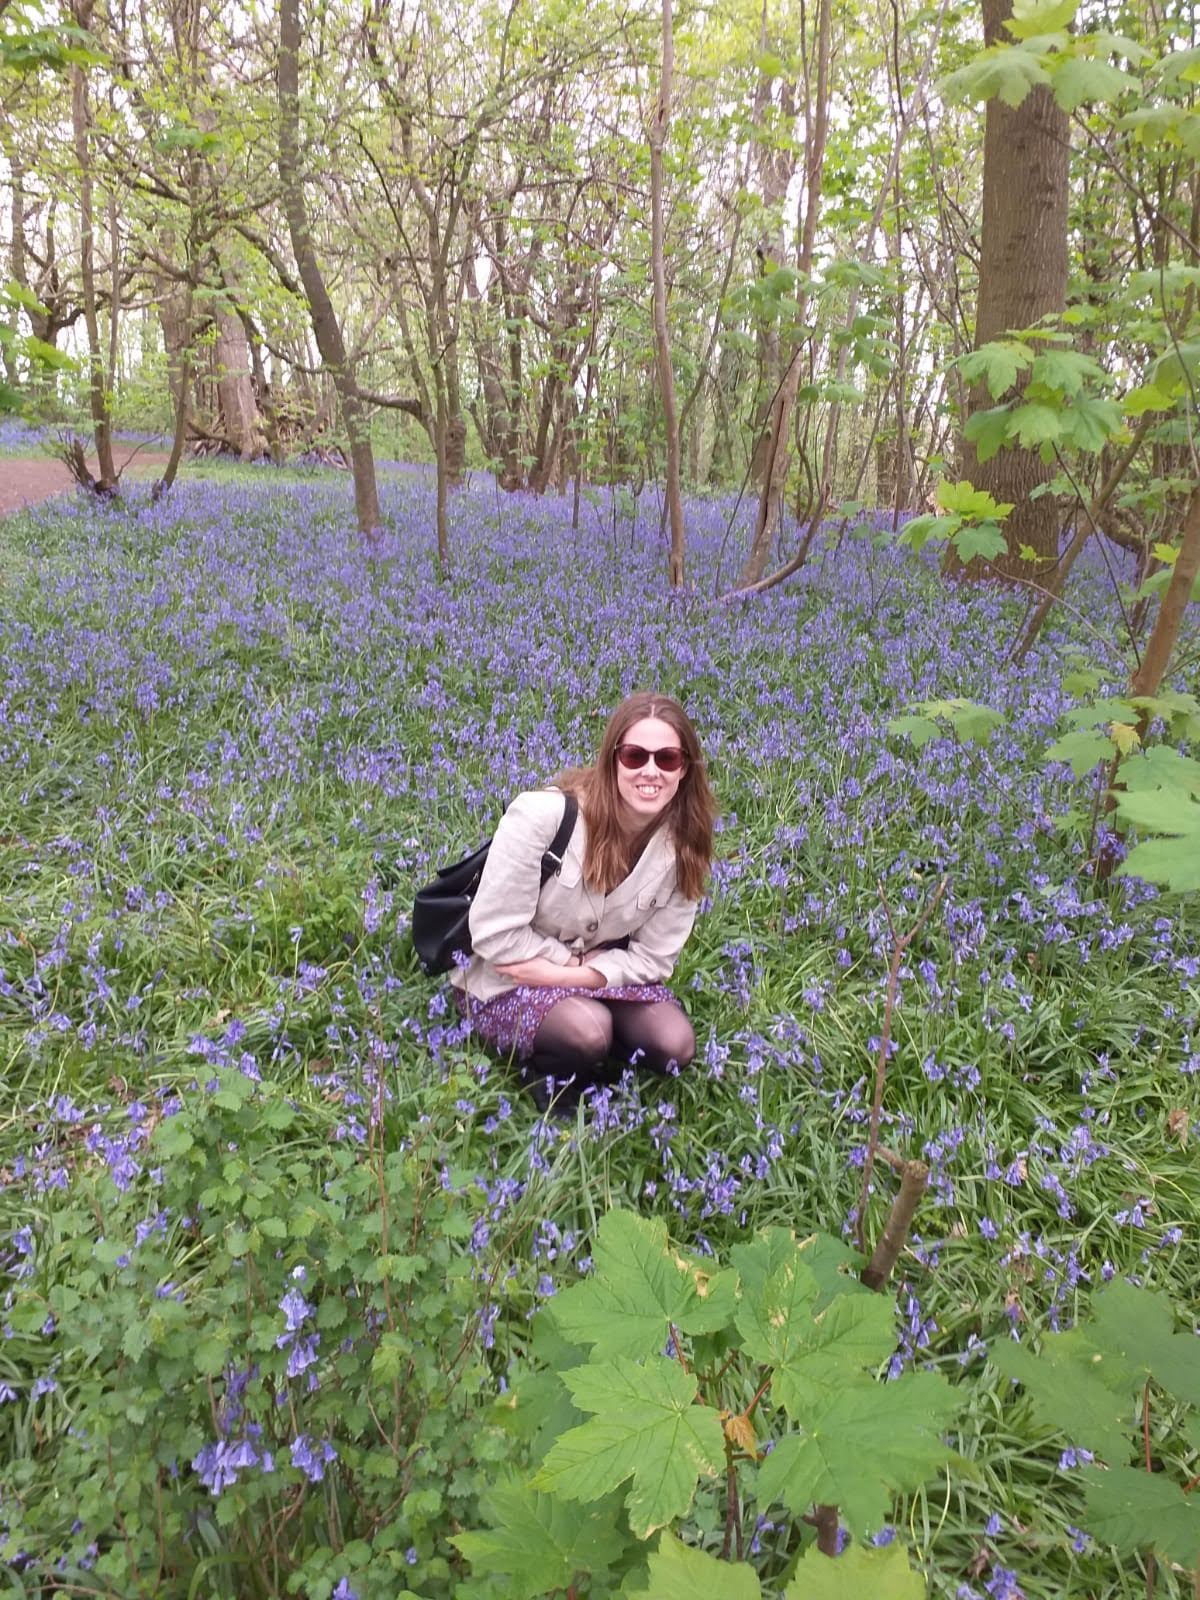 Cadence, a white woman with medium length brown hair and sunglasses, wearing a beige linen jacket with a brown and purple floral skirt, and carrying a black backpack, crouches in the middle of a carpet of bluebells)